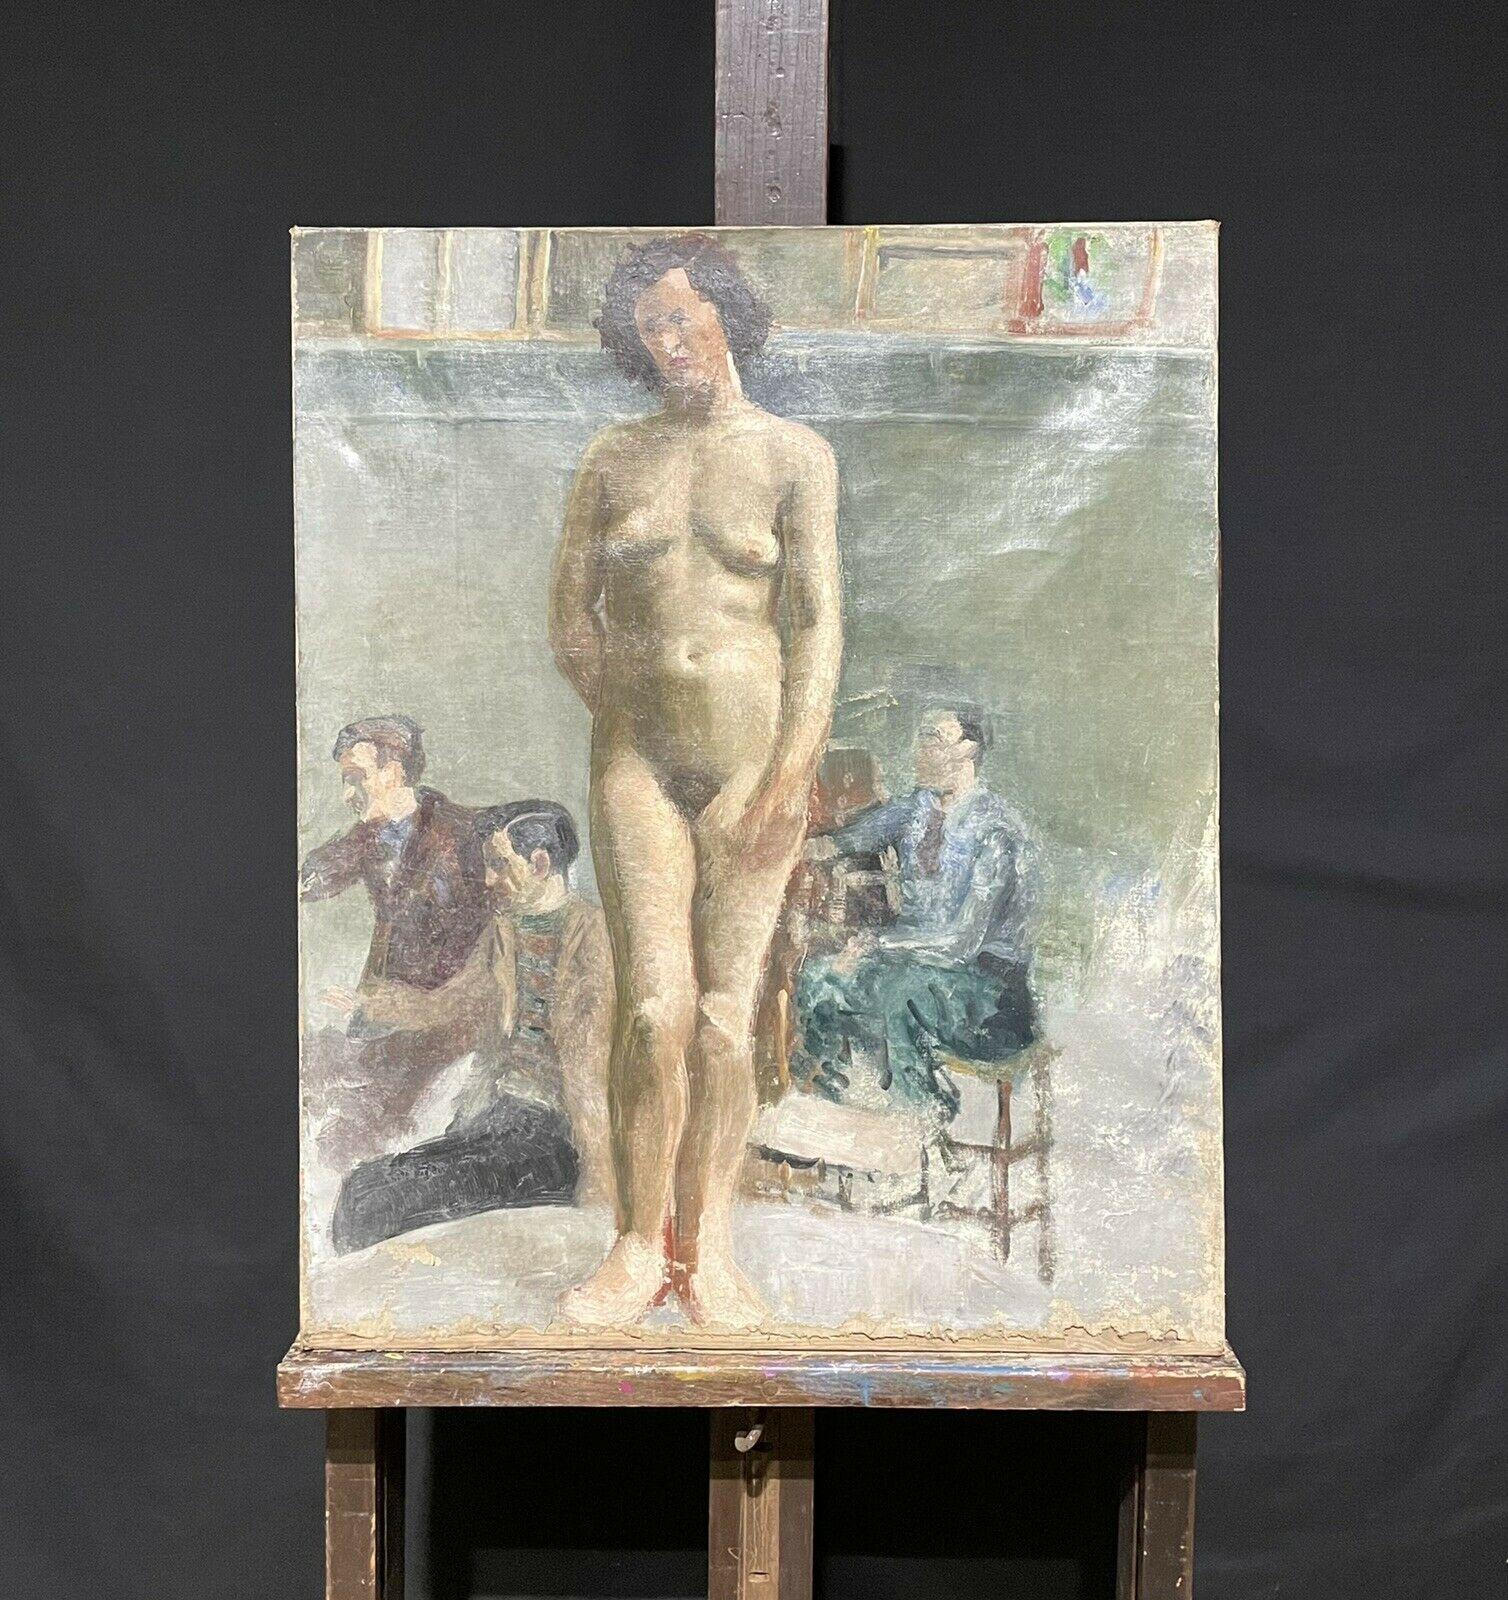 1930's MODERN BRITISH OIL - ARTISTS STUDIO STILL LIFE ART CLASS WITH NUDE MODEL - Painting by British School